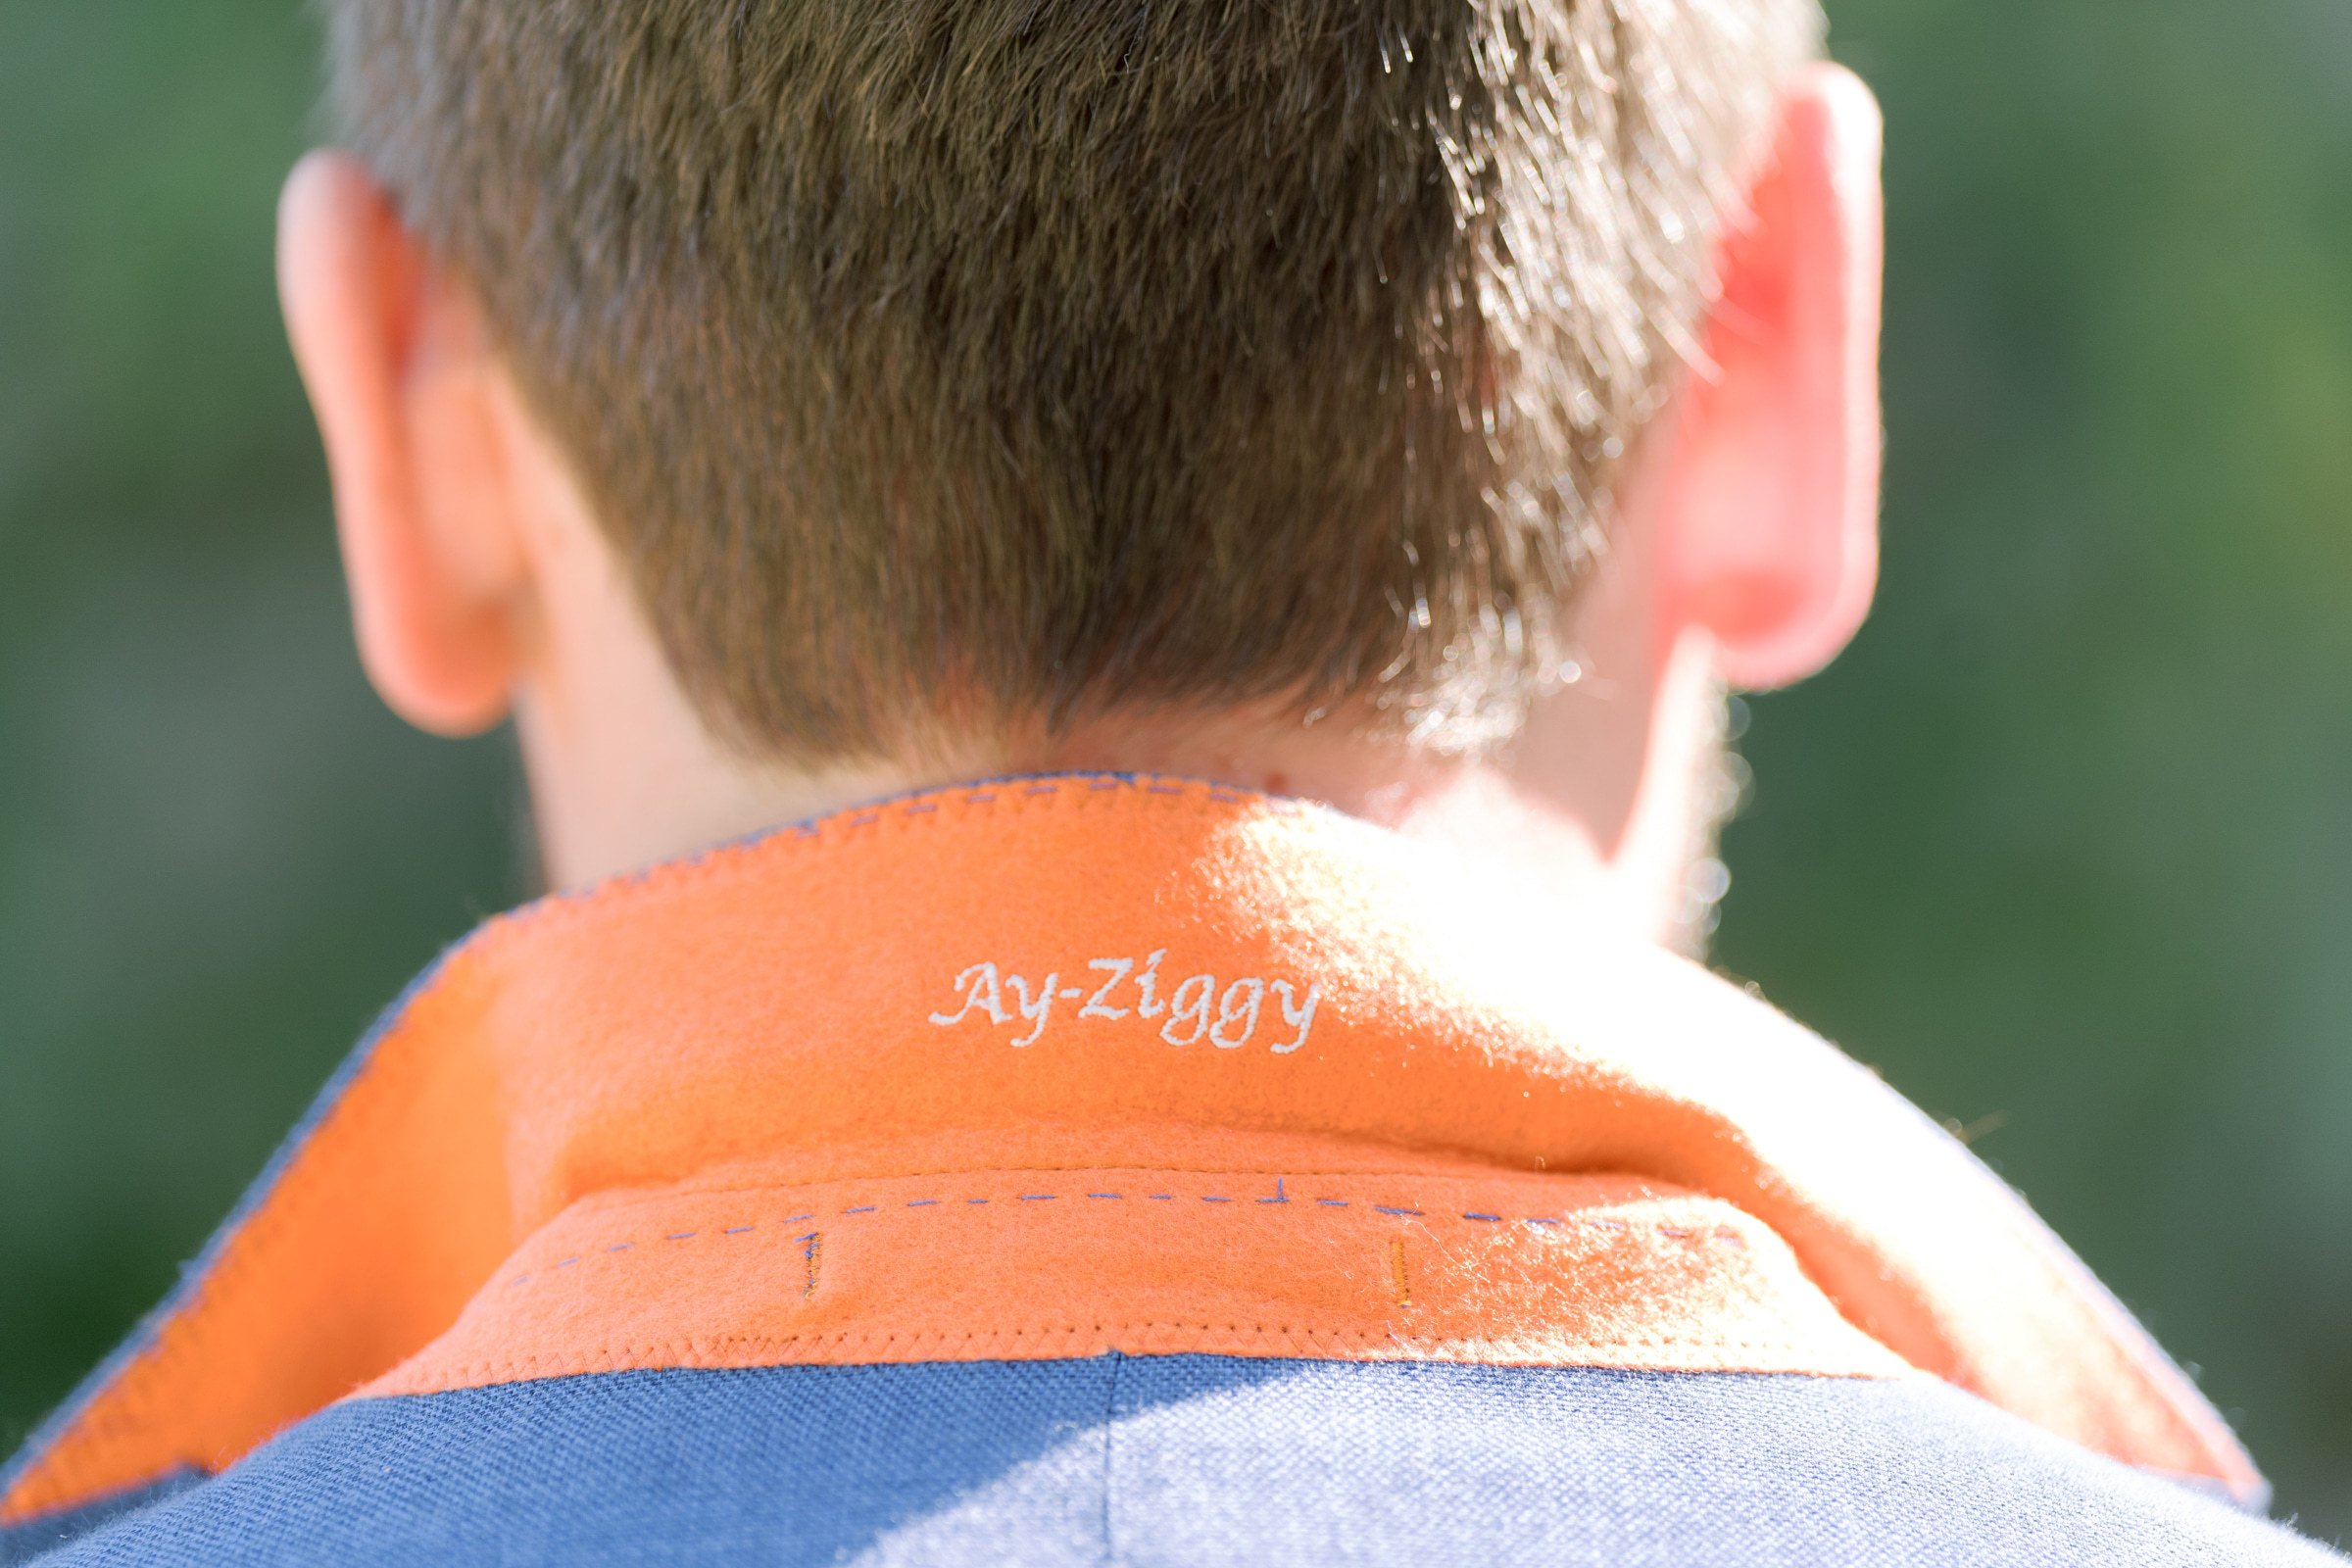 An orange collar with the words "Ay Ziggy" embroidered in white.